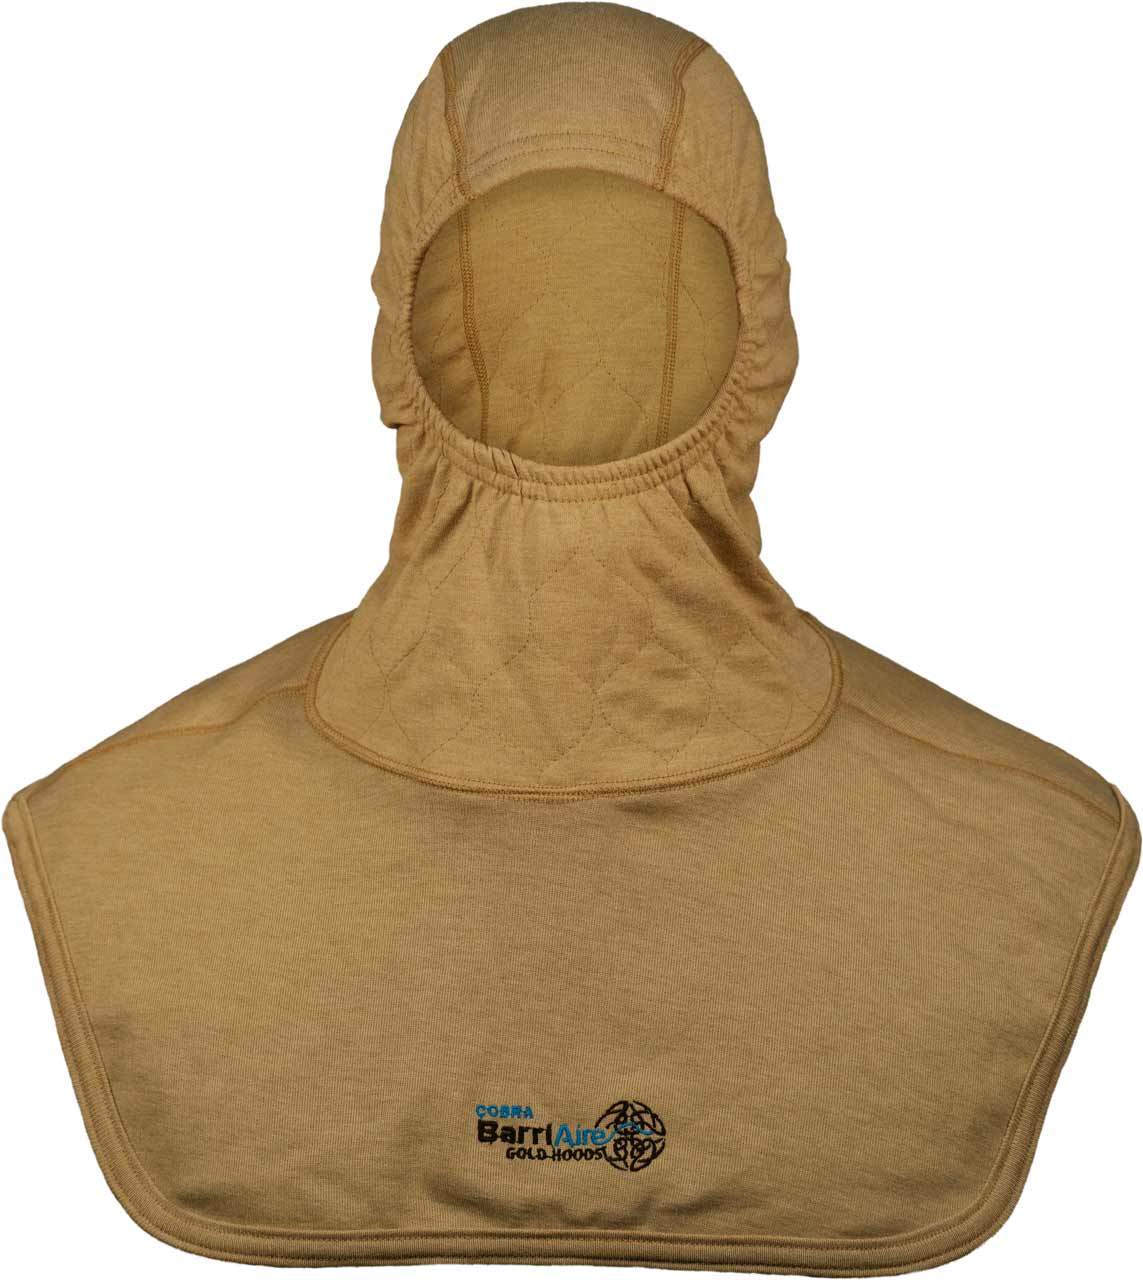 PGI BarriAire Gold Particulate Hood - Critical Coverage with Extended Bib and Nomex<sup>®</sup> Nano Flex Face Opening 39706-00-194071 - Front